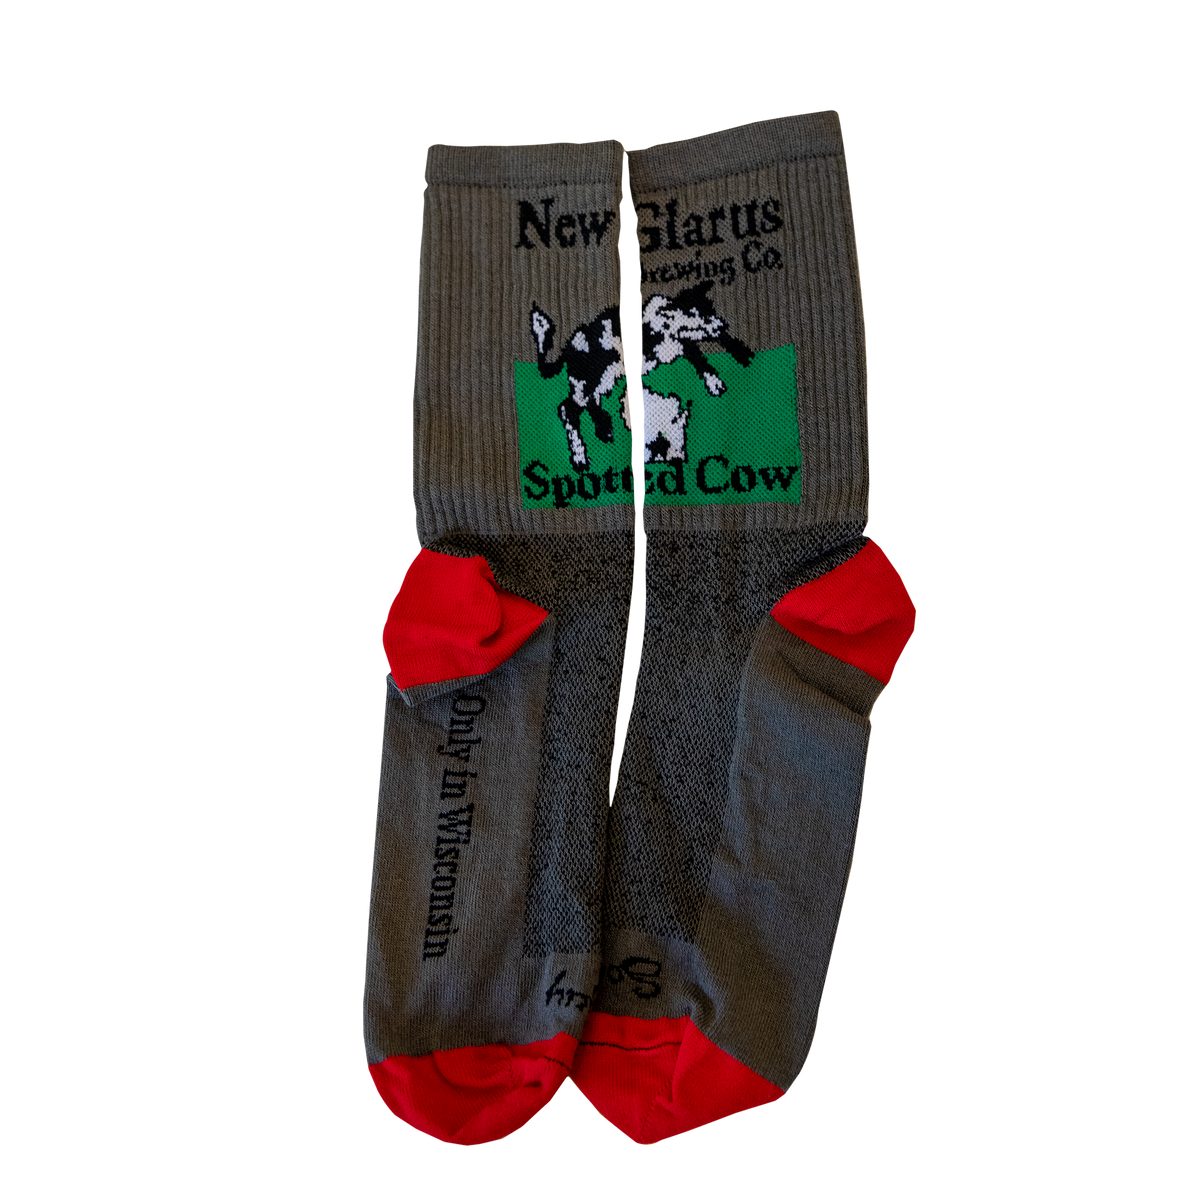 Gray socks with the New Glarus Brewing Co. Spotted Cow logo in black, white and green. The heels and toes of the socks are red.